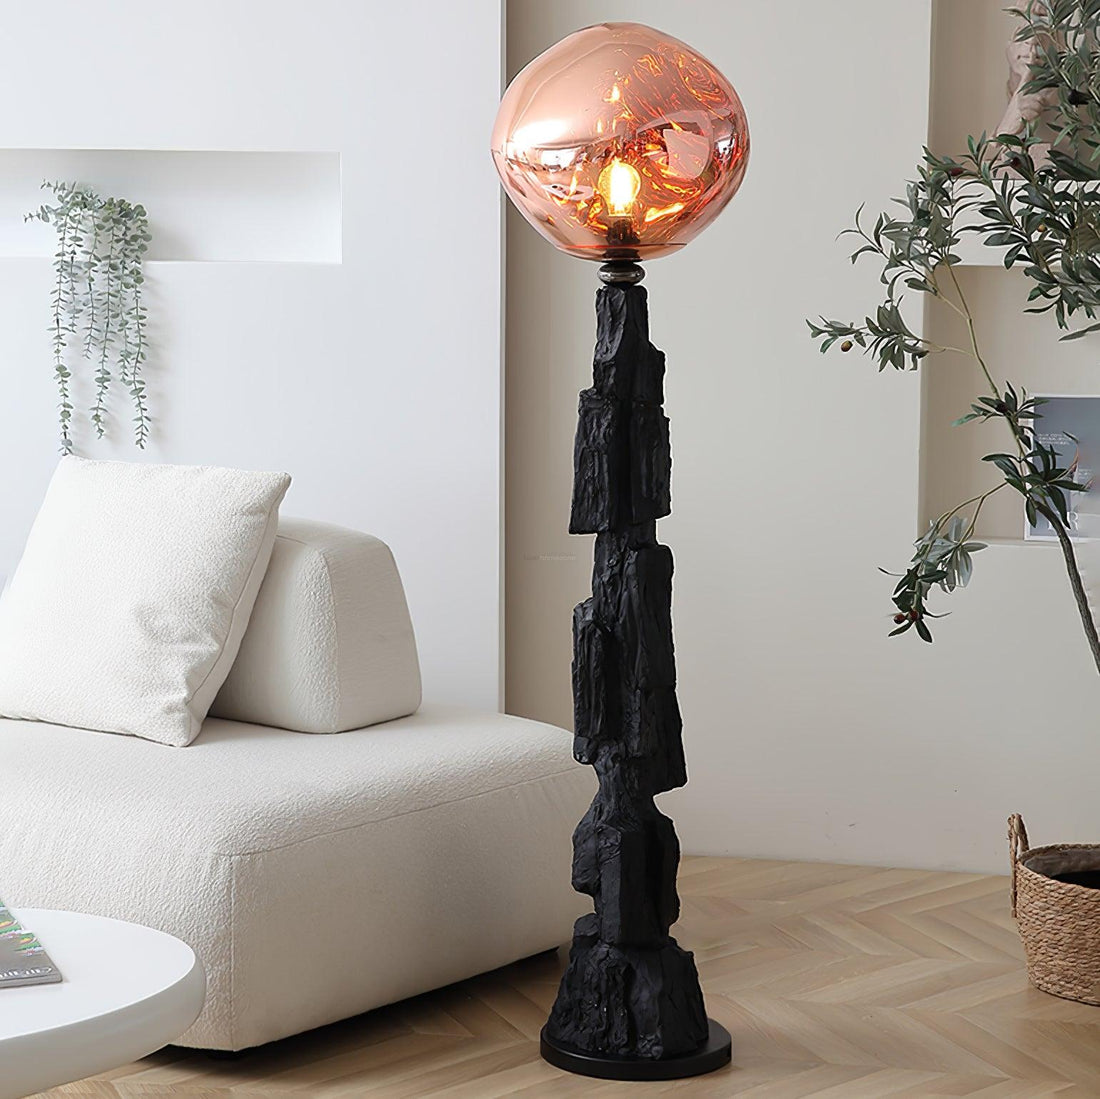 Lava Floor Lamp with Charcoal Color